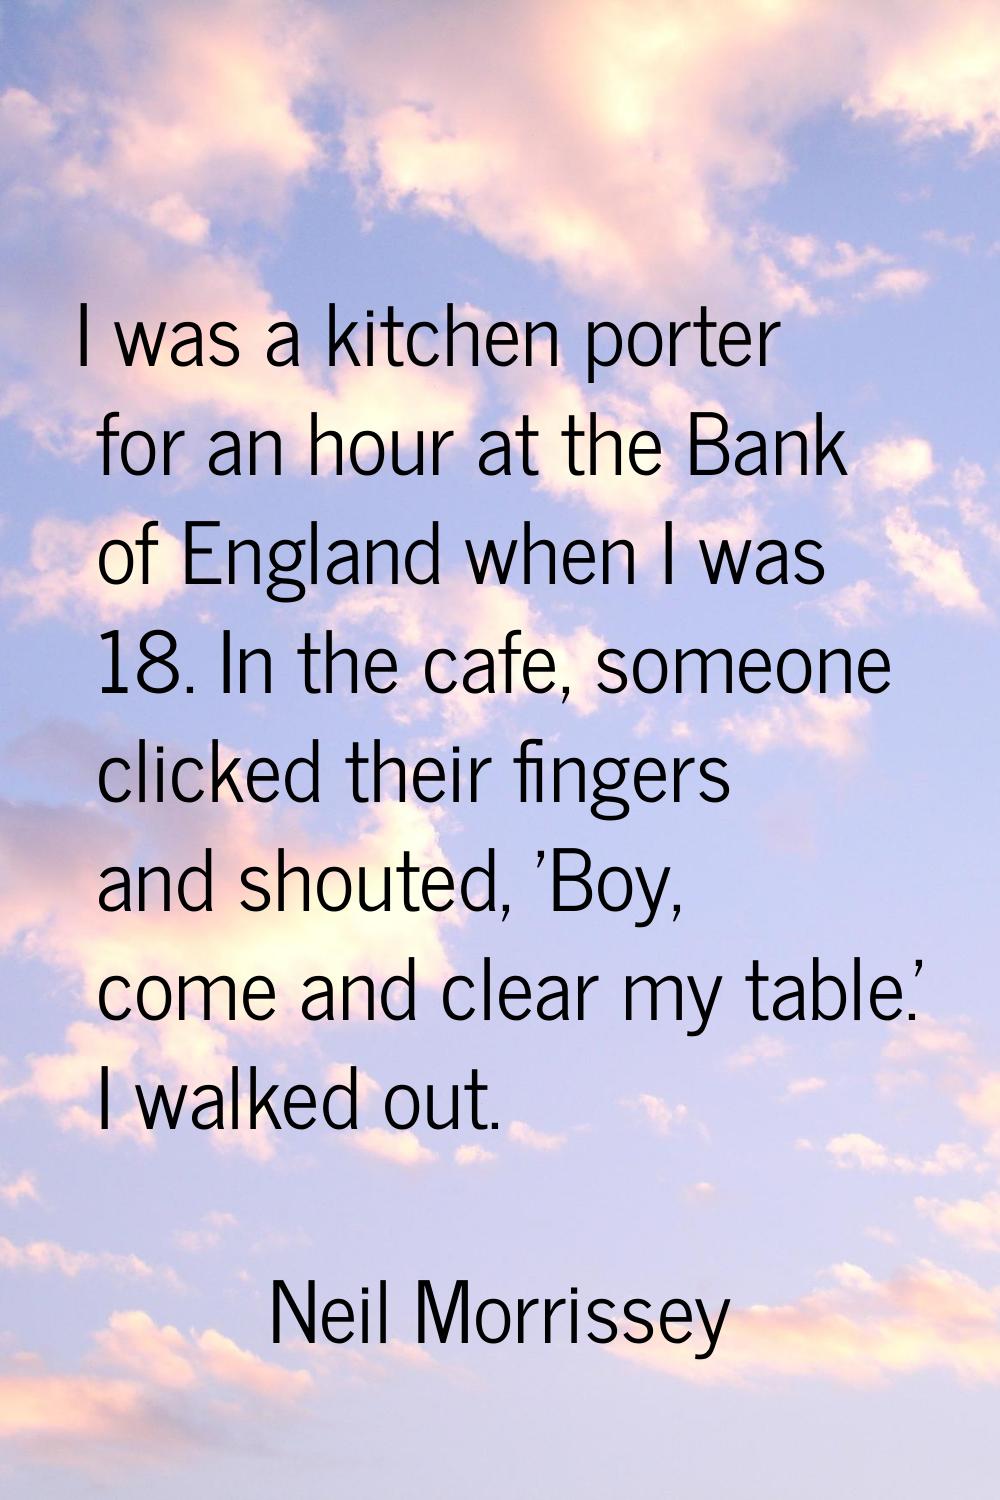 I was a kitchen porter for an hour at the Bank of England when I was 18. In the cafe, someone click